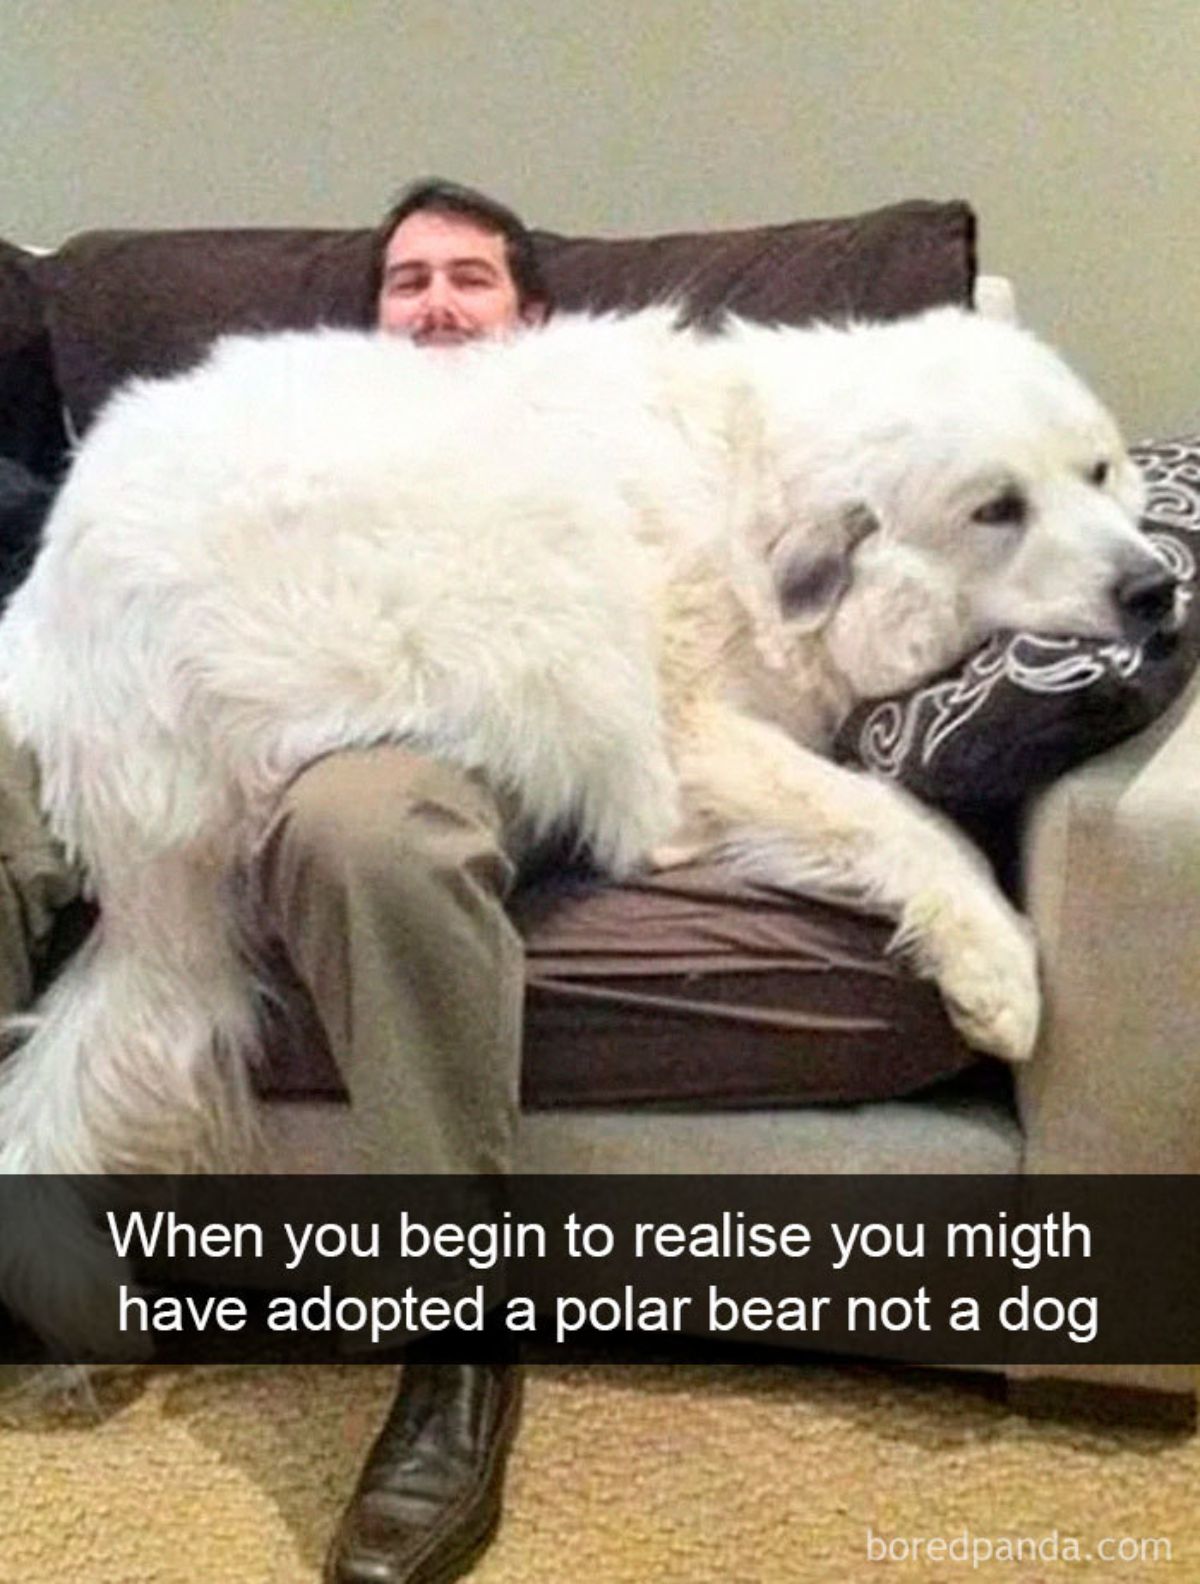 large and fluffy white dog laying across someone's lap on a brown sofa with a caption saying when you begin to realise you might have adopted a polar bear not a dog